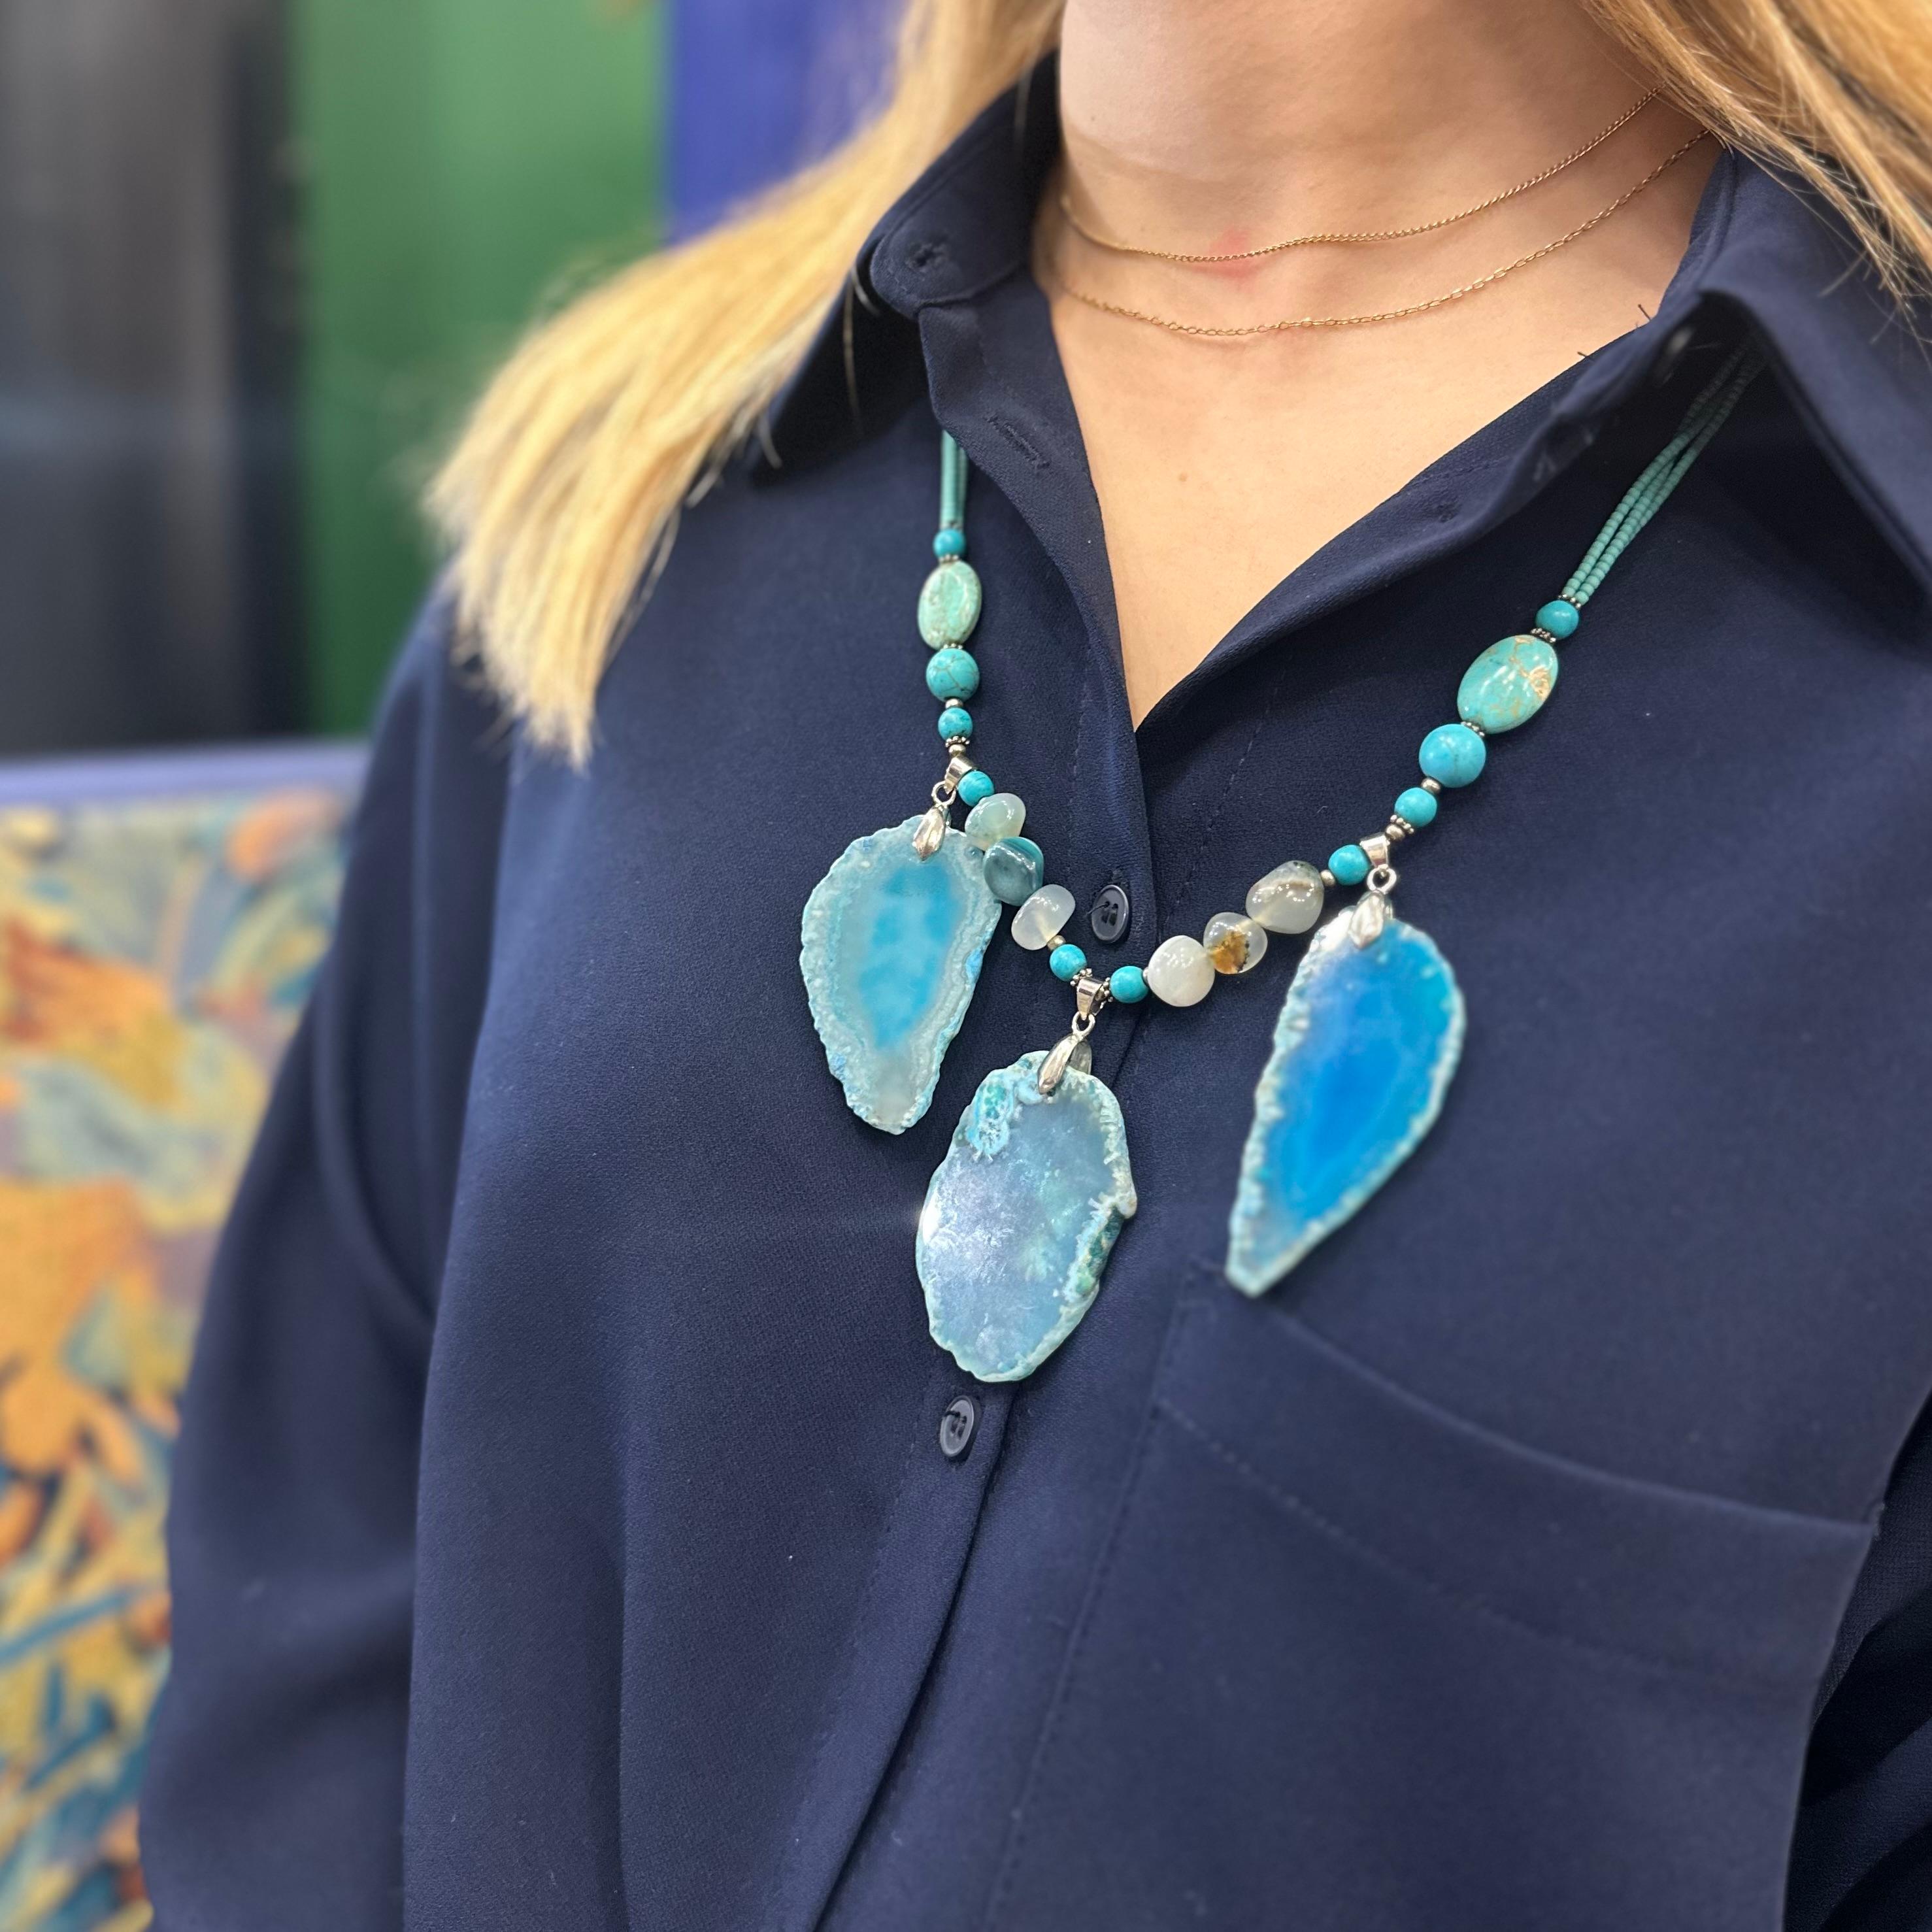 Beautiful and absolutely modern Italian silver necklace with a chain made up of 3 rows of small turquoises crimped and Measurements: Total length 65 cm
silver closure
measurements of the agate pieces: 5 cm + 1cm silver setting
​joined through small